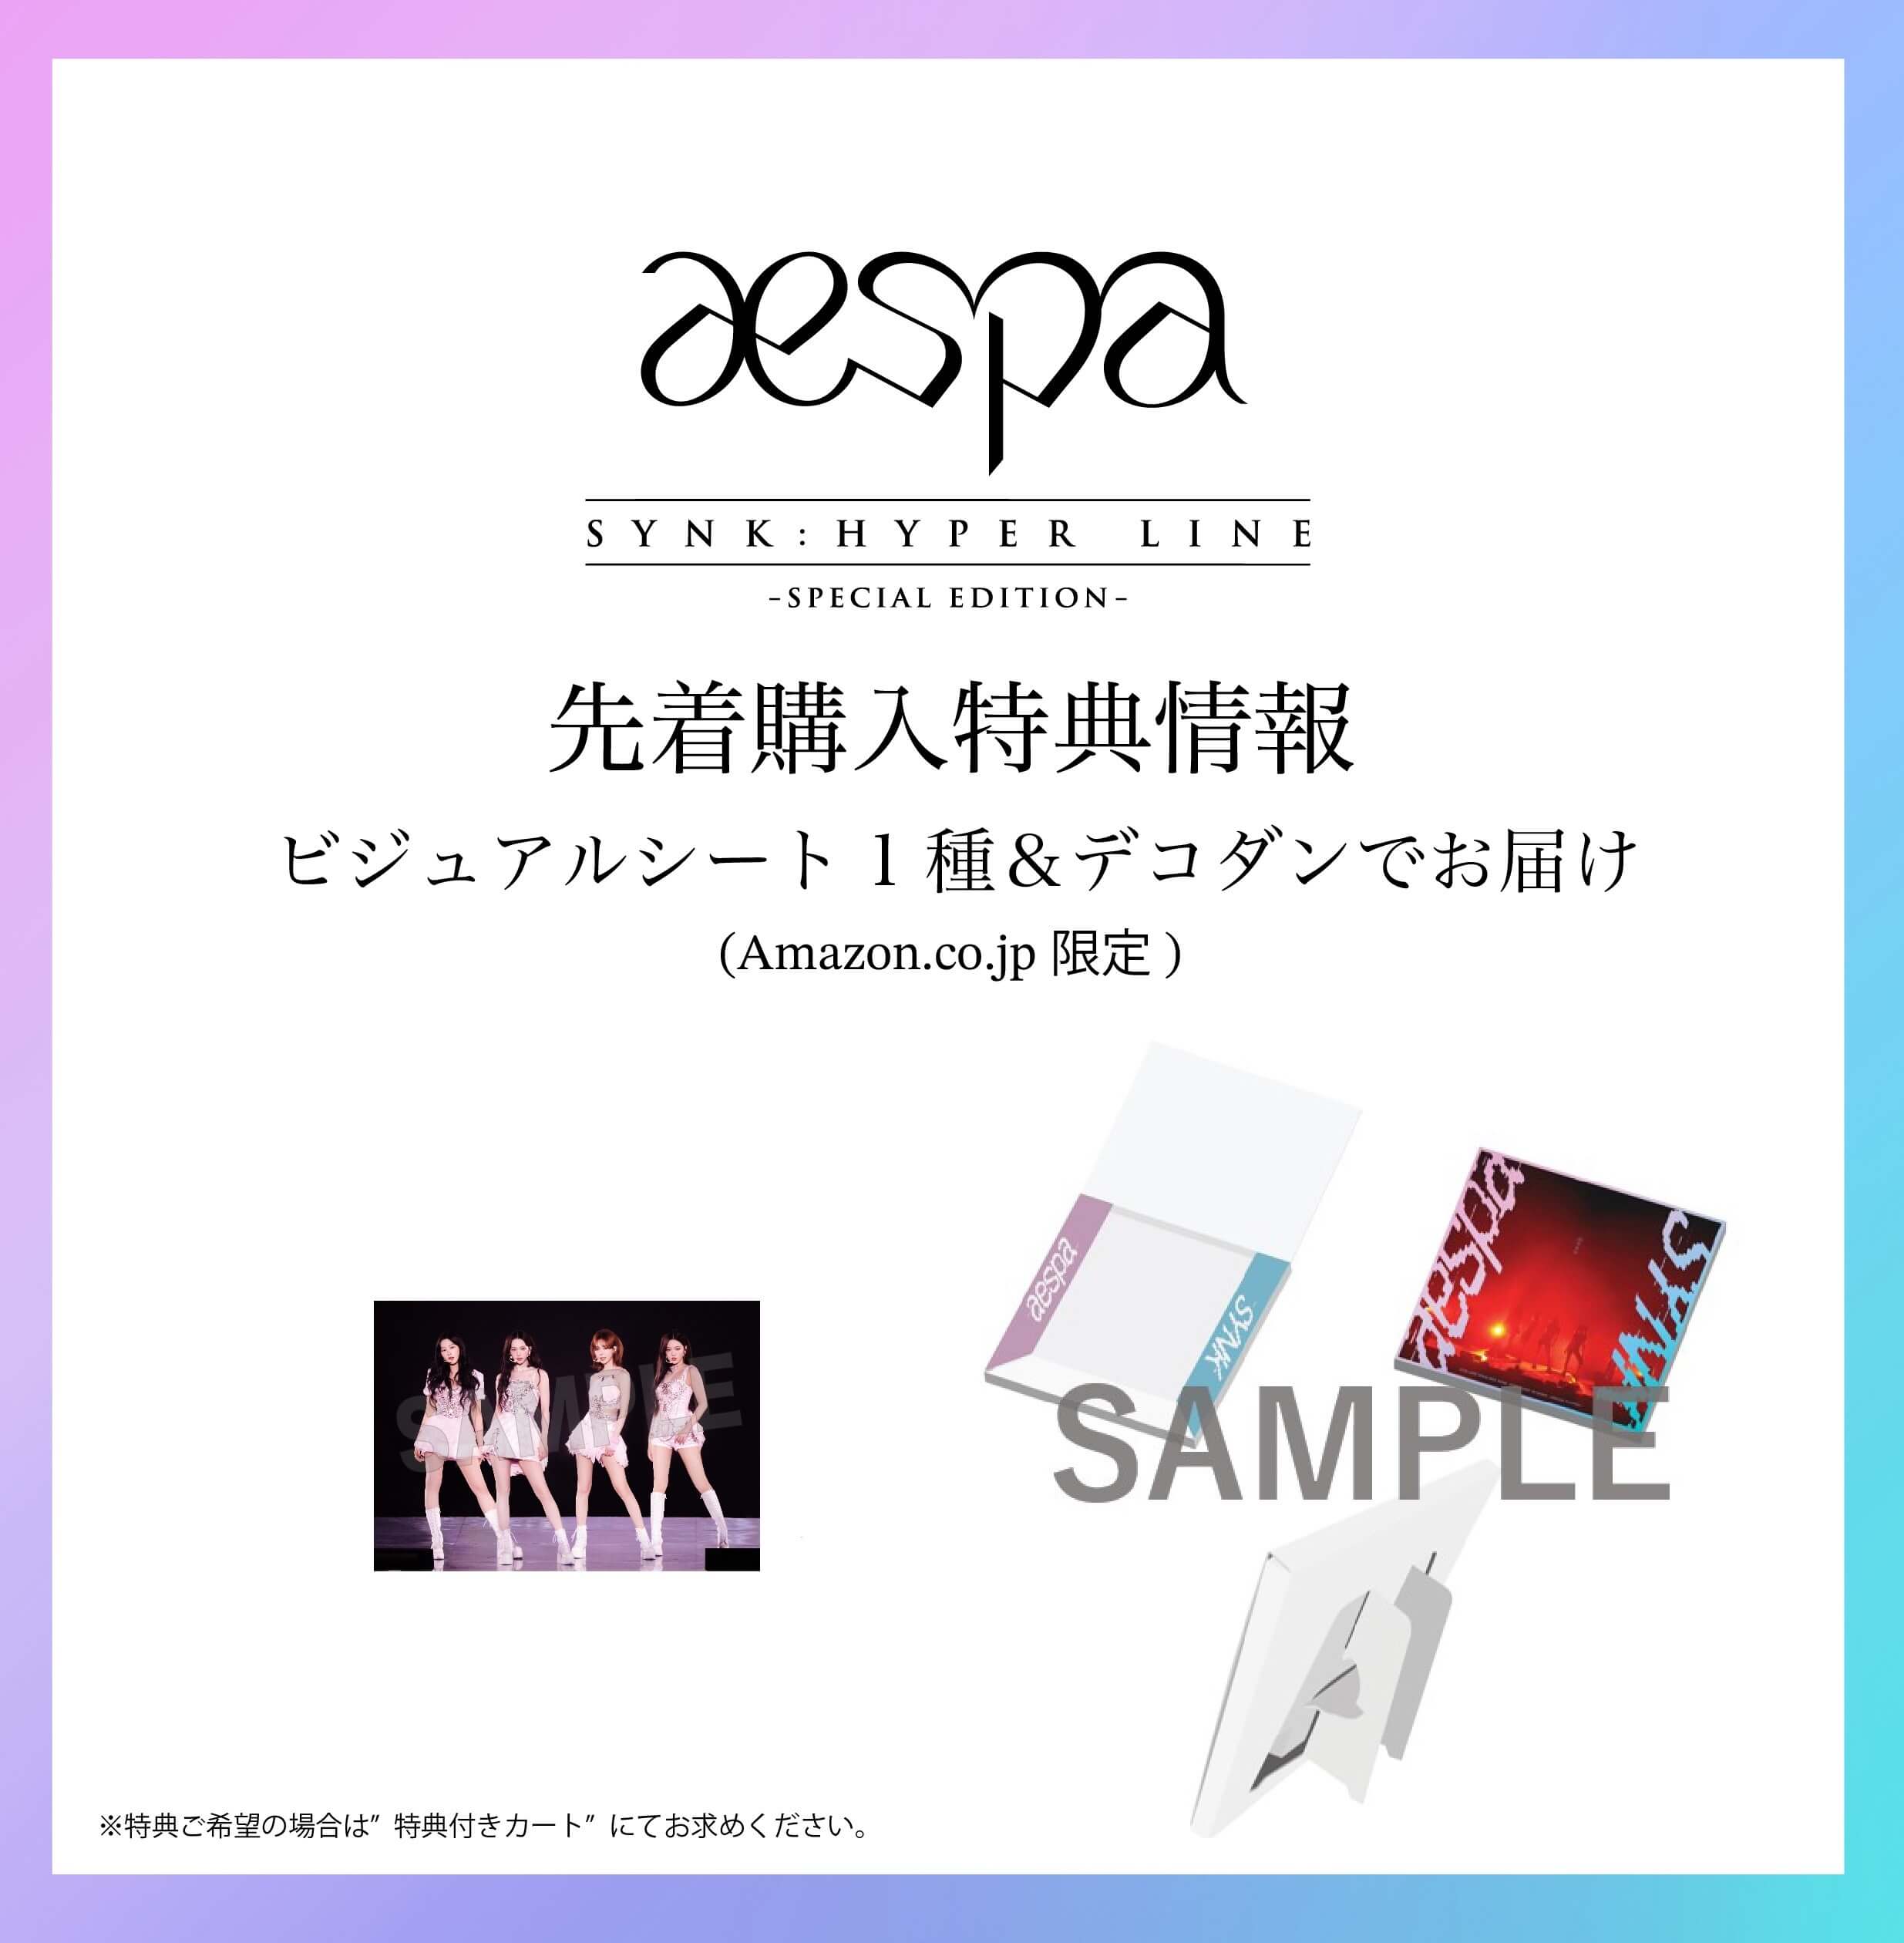 Blu-ray&DVD『aespa LIVE TOUR 2023 'SYNK : HYPER LINE' in JAPAN 